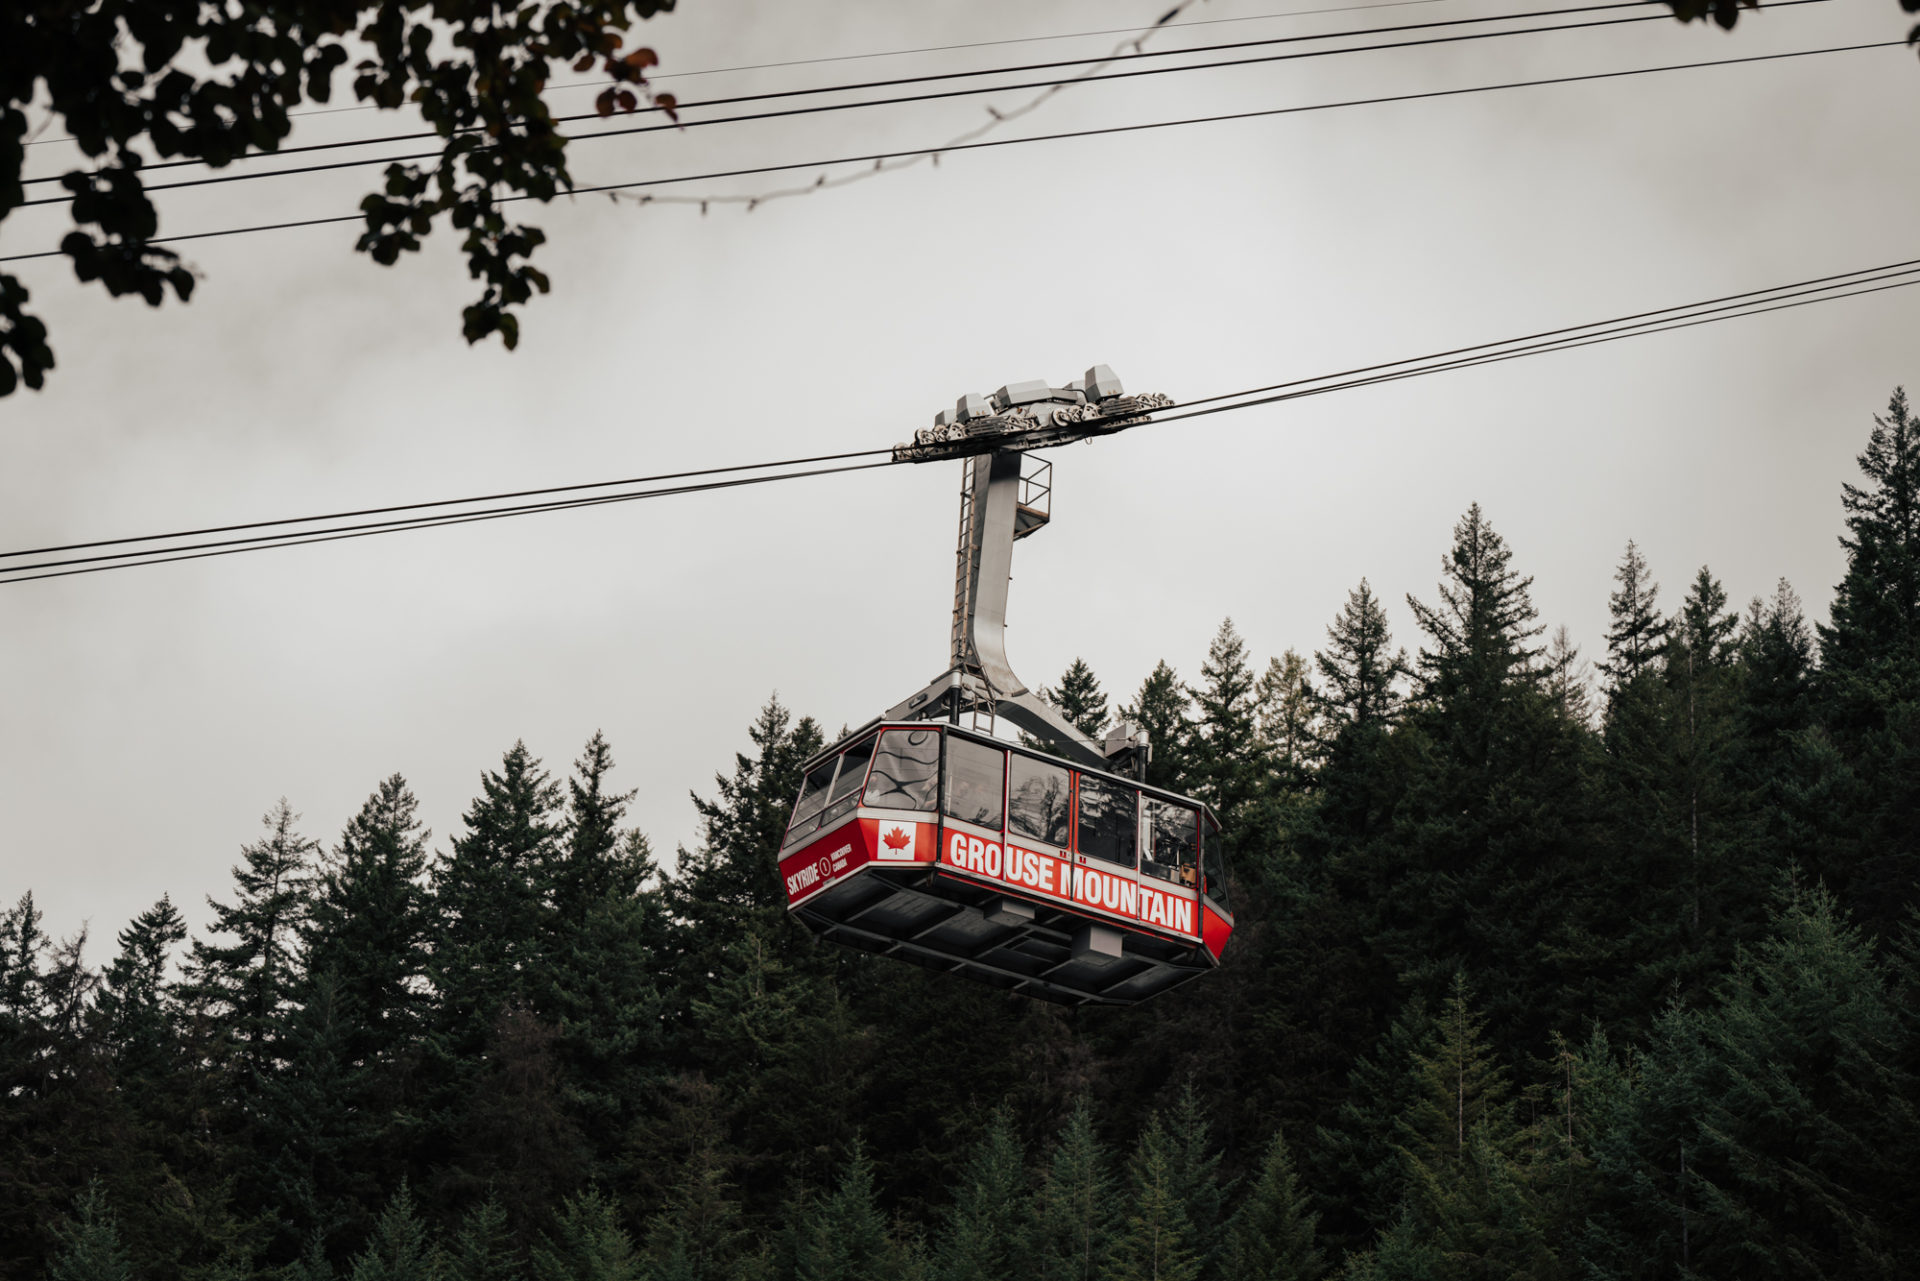 What to do in Vancouver: Grouse Mountain